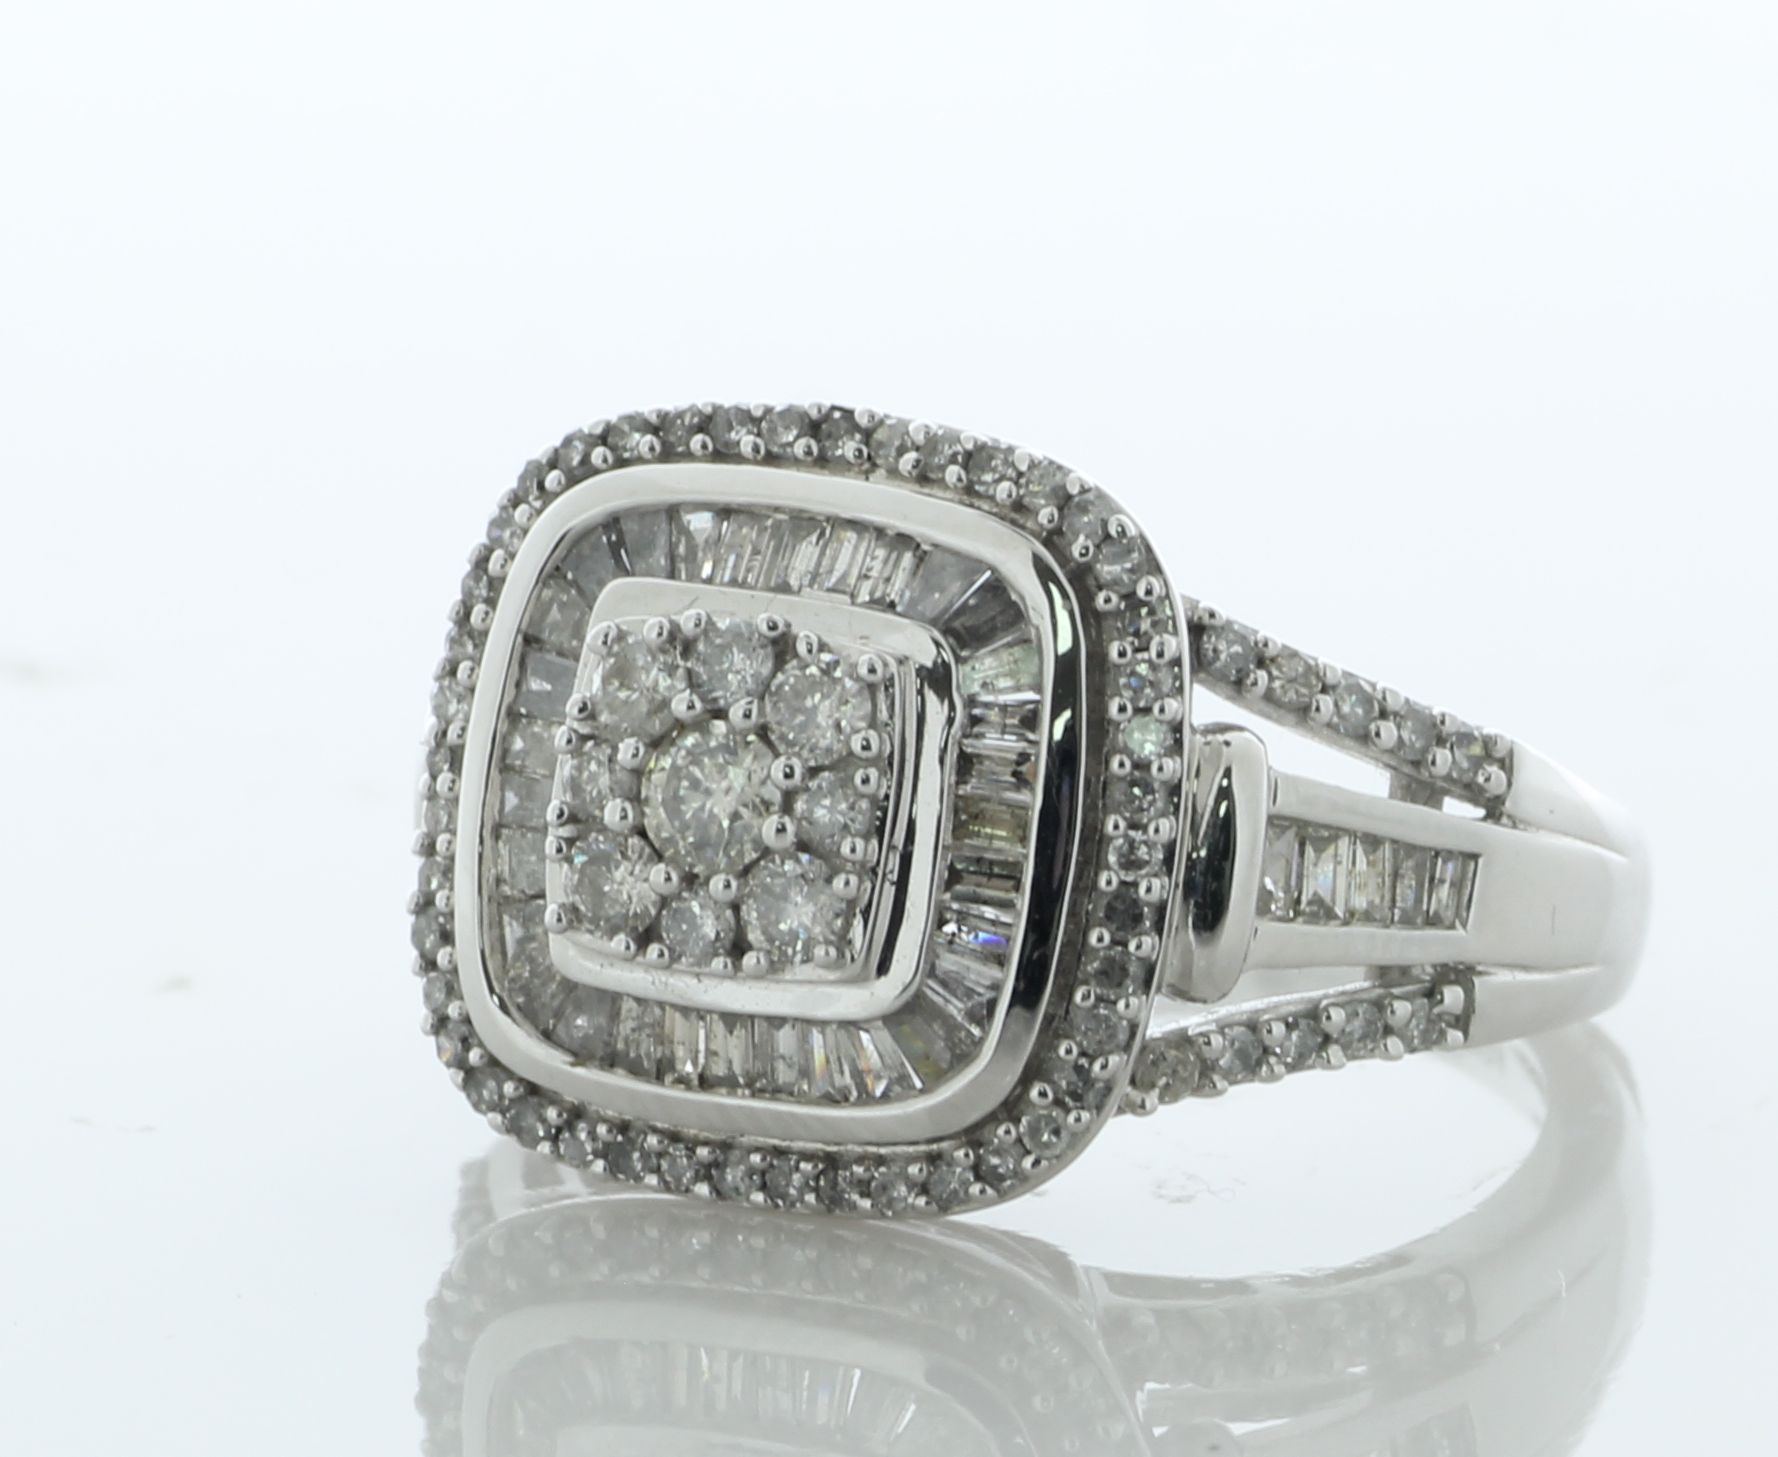 10ct White Gold Fancy Cluster Diamond Ring 1.00 Carats - Valued By IDI £4,995.00 - This gorgeous - Image 4 of 5